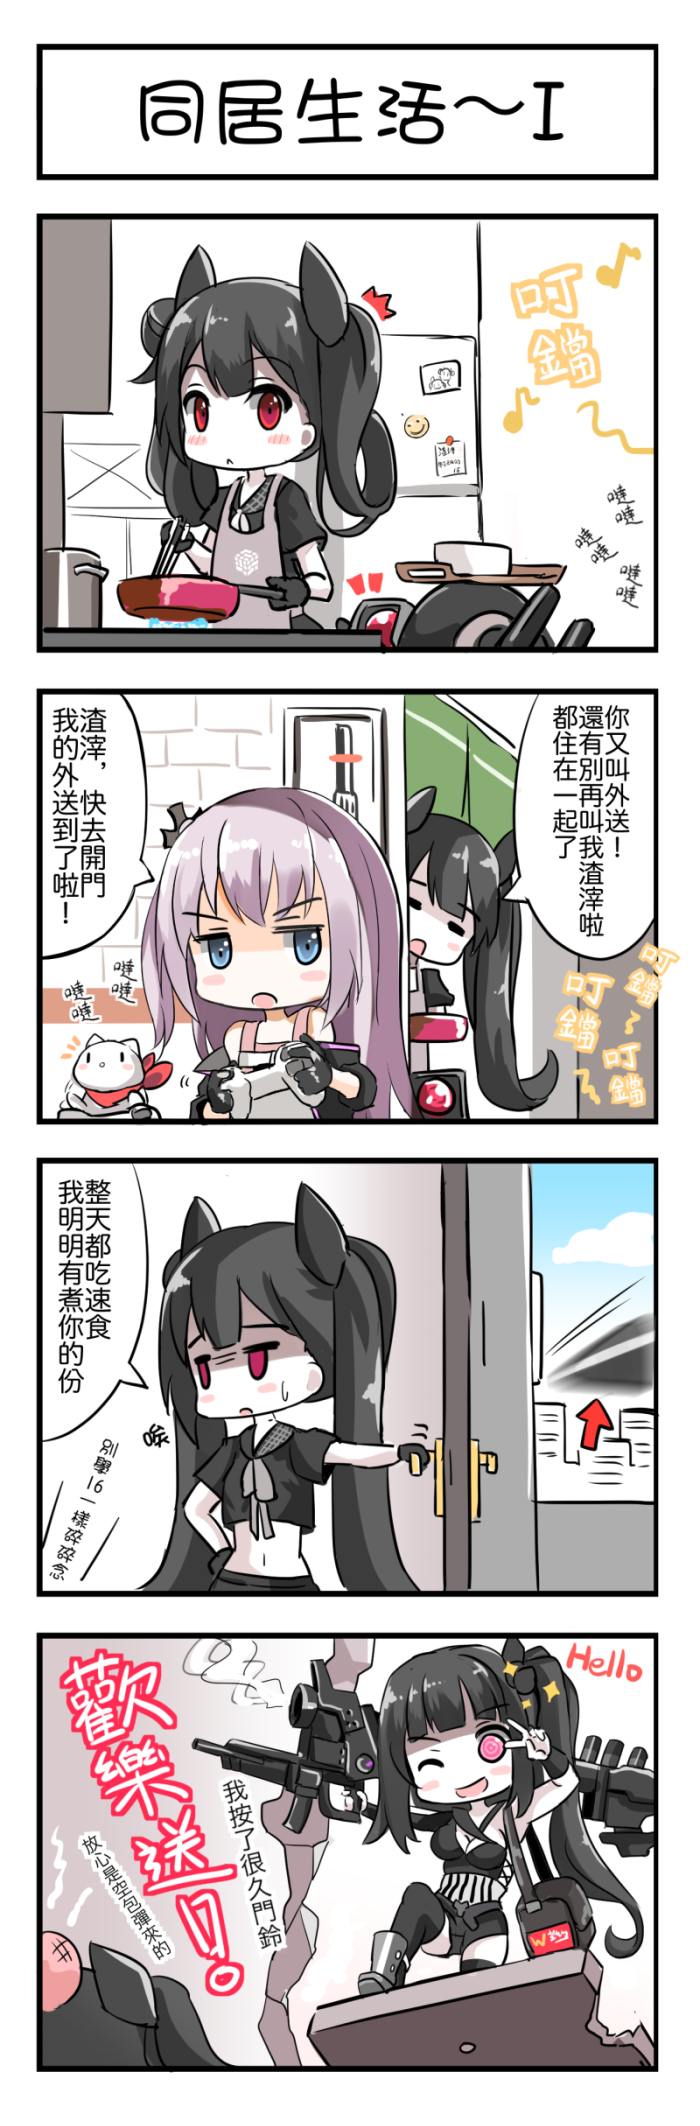 3girls 4koma animal apron architect_(girls_frontline) ascot bag black_hair blue_eyes blush_stickers boots breasts broken_door cleavage comic commentary_request cooking dinergate_(girls_frontline) door doorknob doorway fatkewell ferret frying_pan girls_frontline gloves gun highres midriff multiple_girls one_eye_closed opening_door ouroboros_(girls_frontline) pink_eyes playing_games pot purple_hair red_eyes refrigerator rocket_launcher side_ponytail st_ar-15_(girls_frontline) translation_request twintails weapon